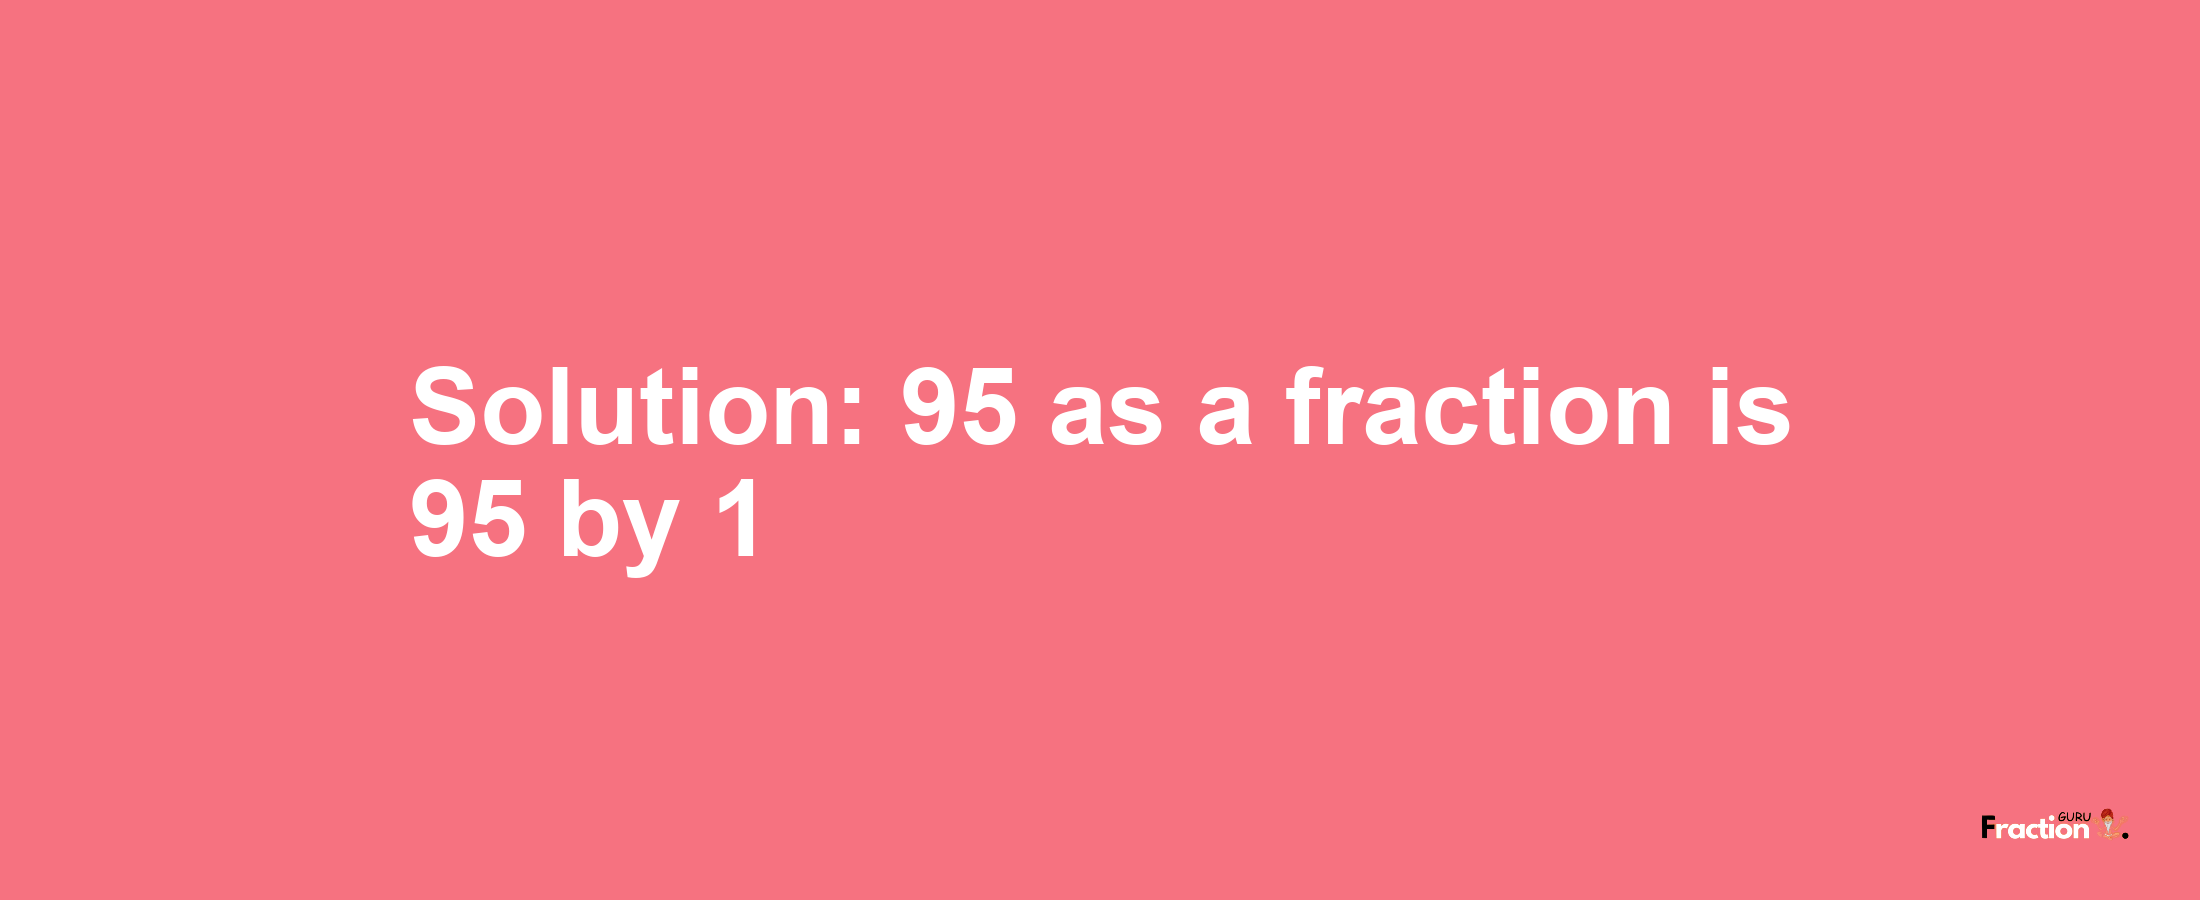 Solution:95 as a fraction is 95/1